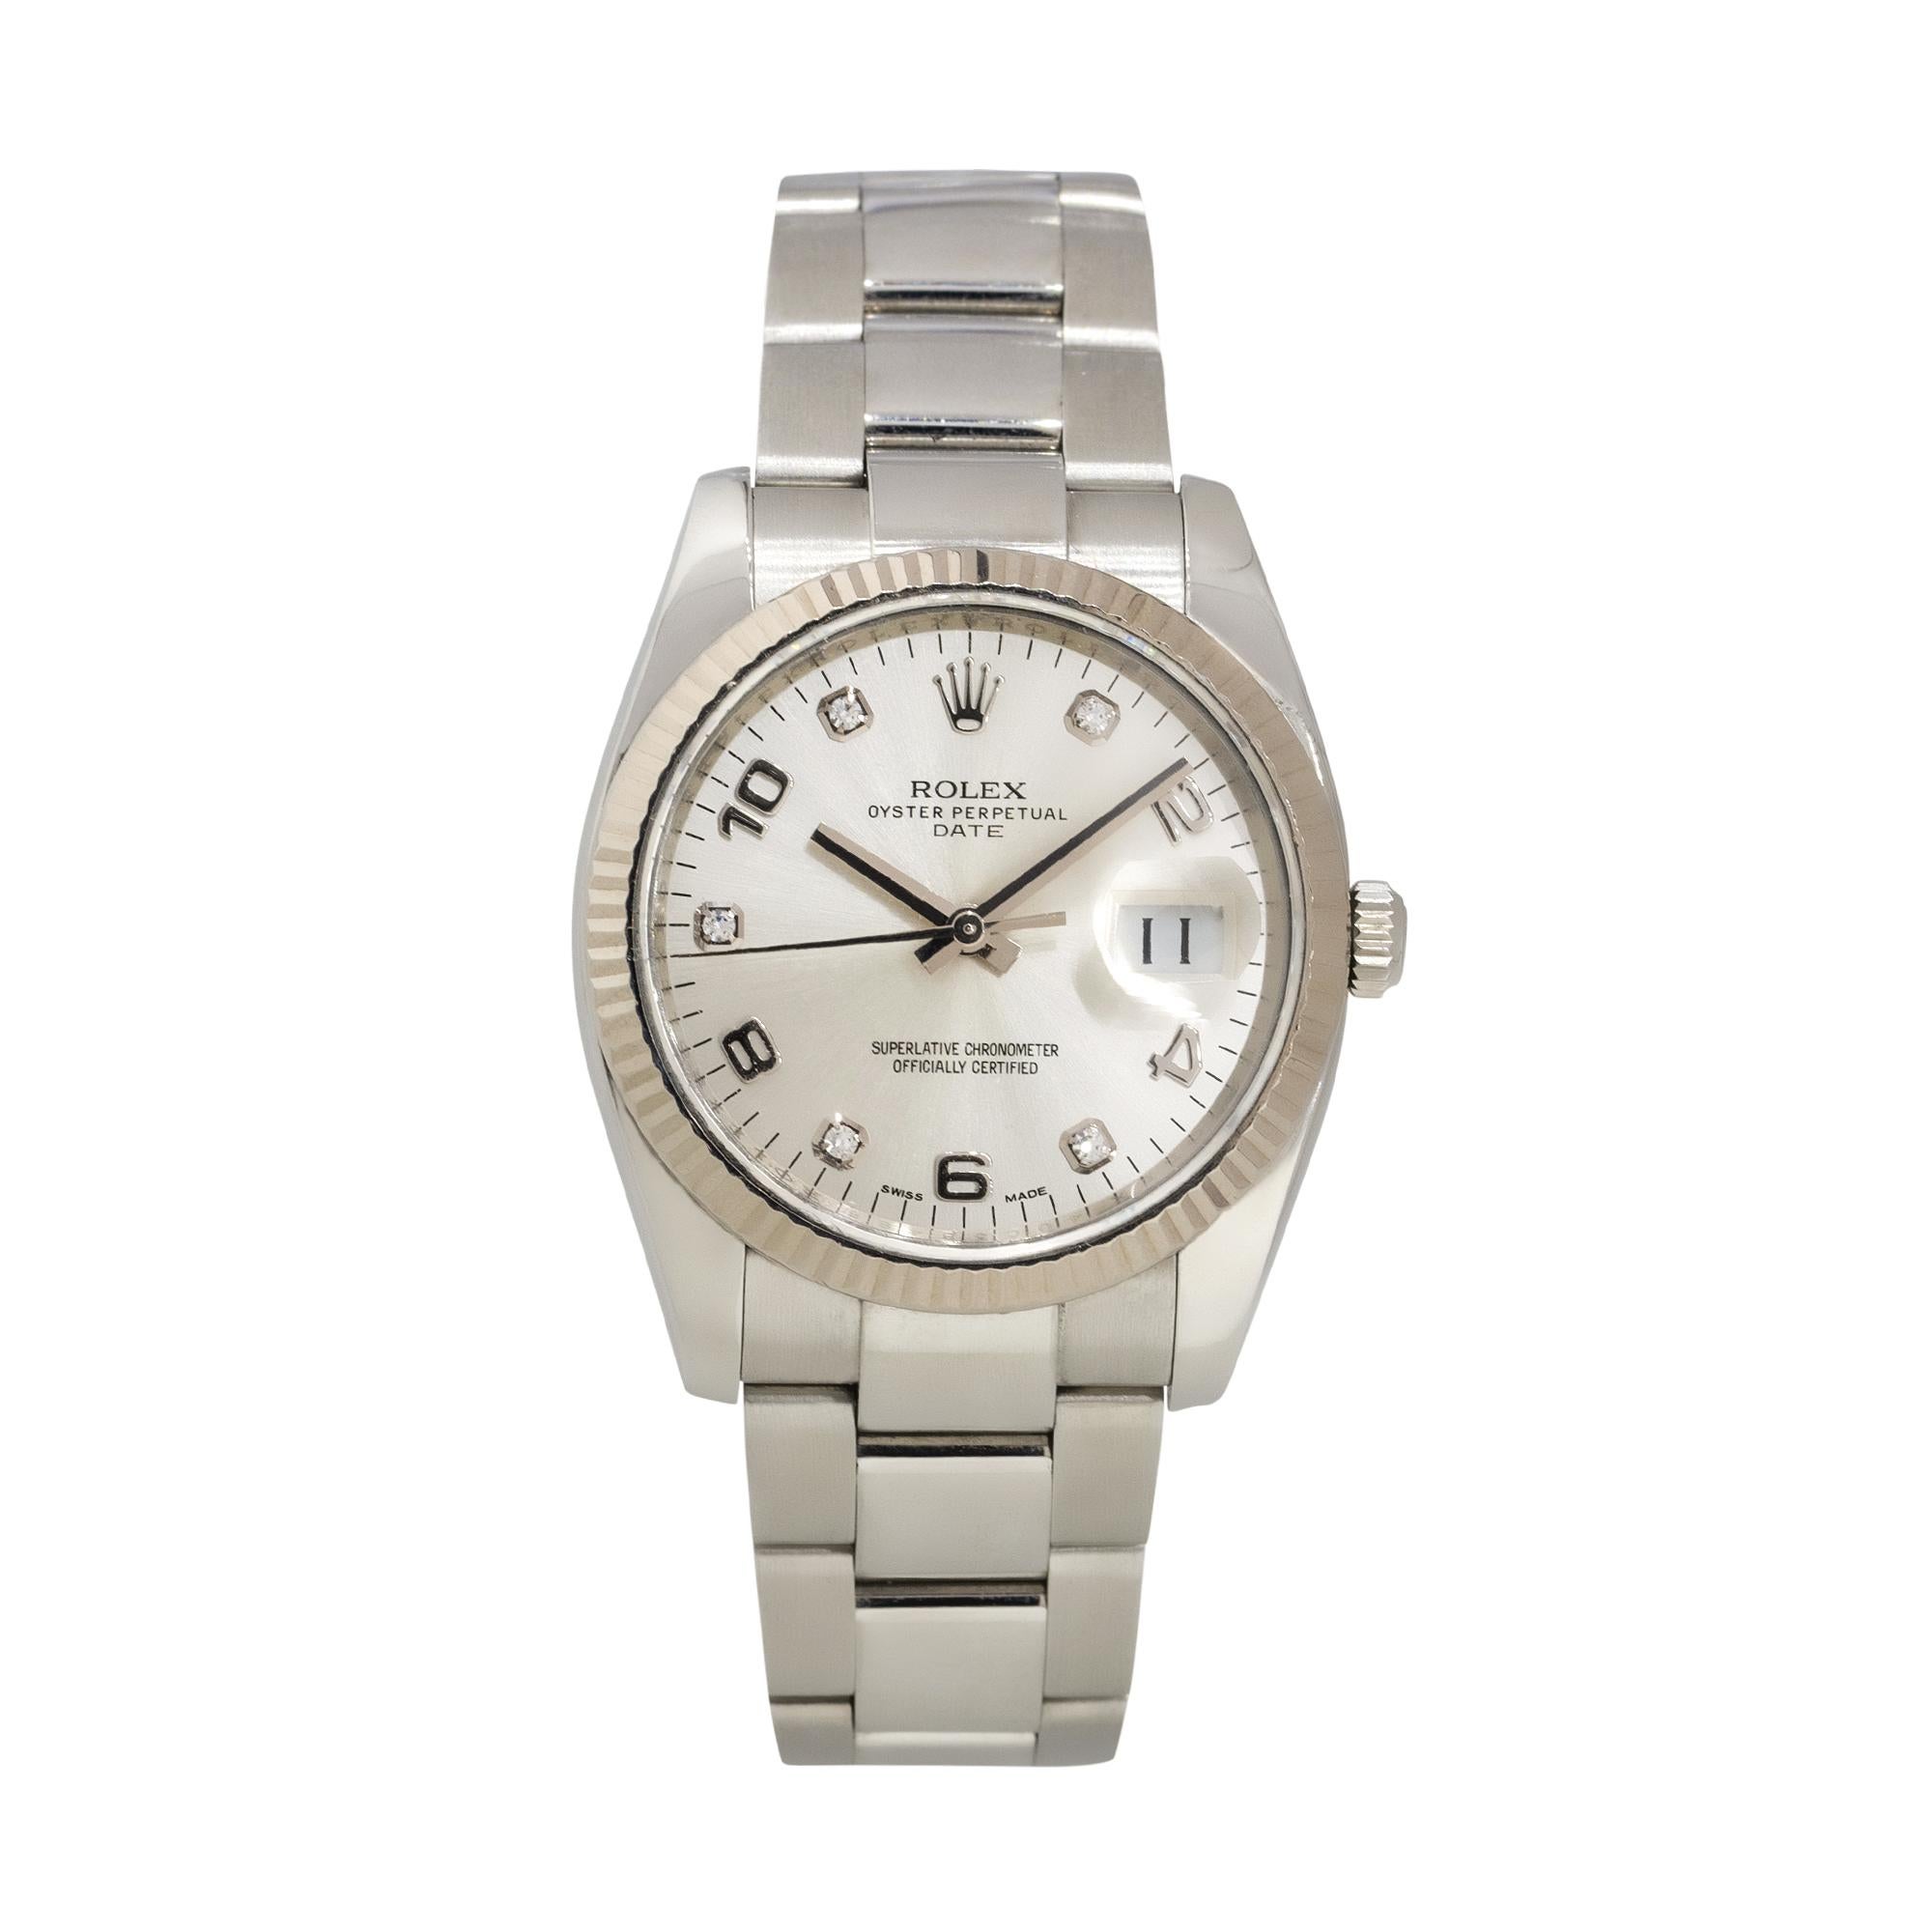 Brand: Rolex
MPN: 115234
Model: Datejust
Case Material: Stainless Steel
Case Diameter: 34mm
Bezel: 18k White gold fluted bezel
Dial: Factory silver dial with silver hands and Roman/Diamond hour markers. Date can be found at 3 o'clock
Bracelet: